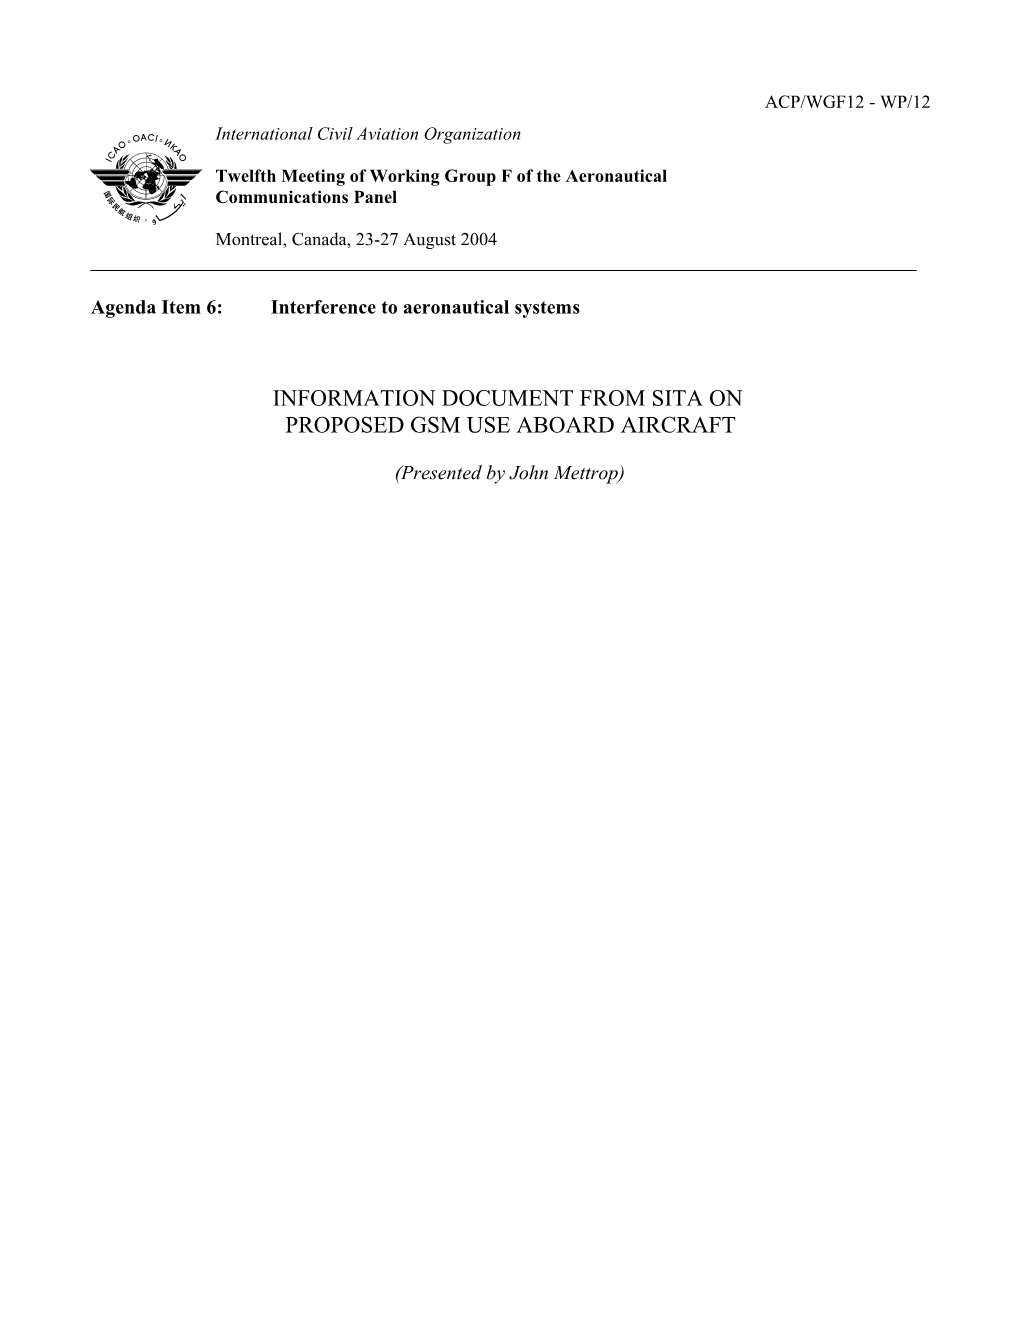 Information Document from SITA on Proposed GSM Use Aboard Aircraft